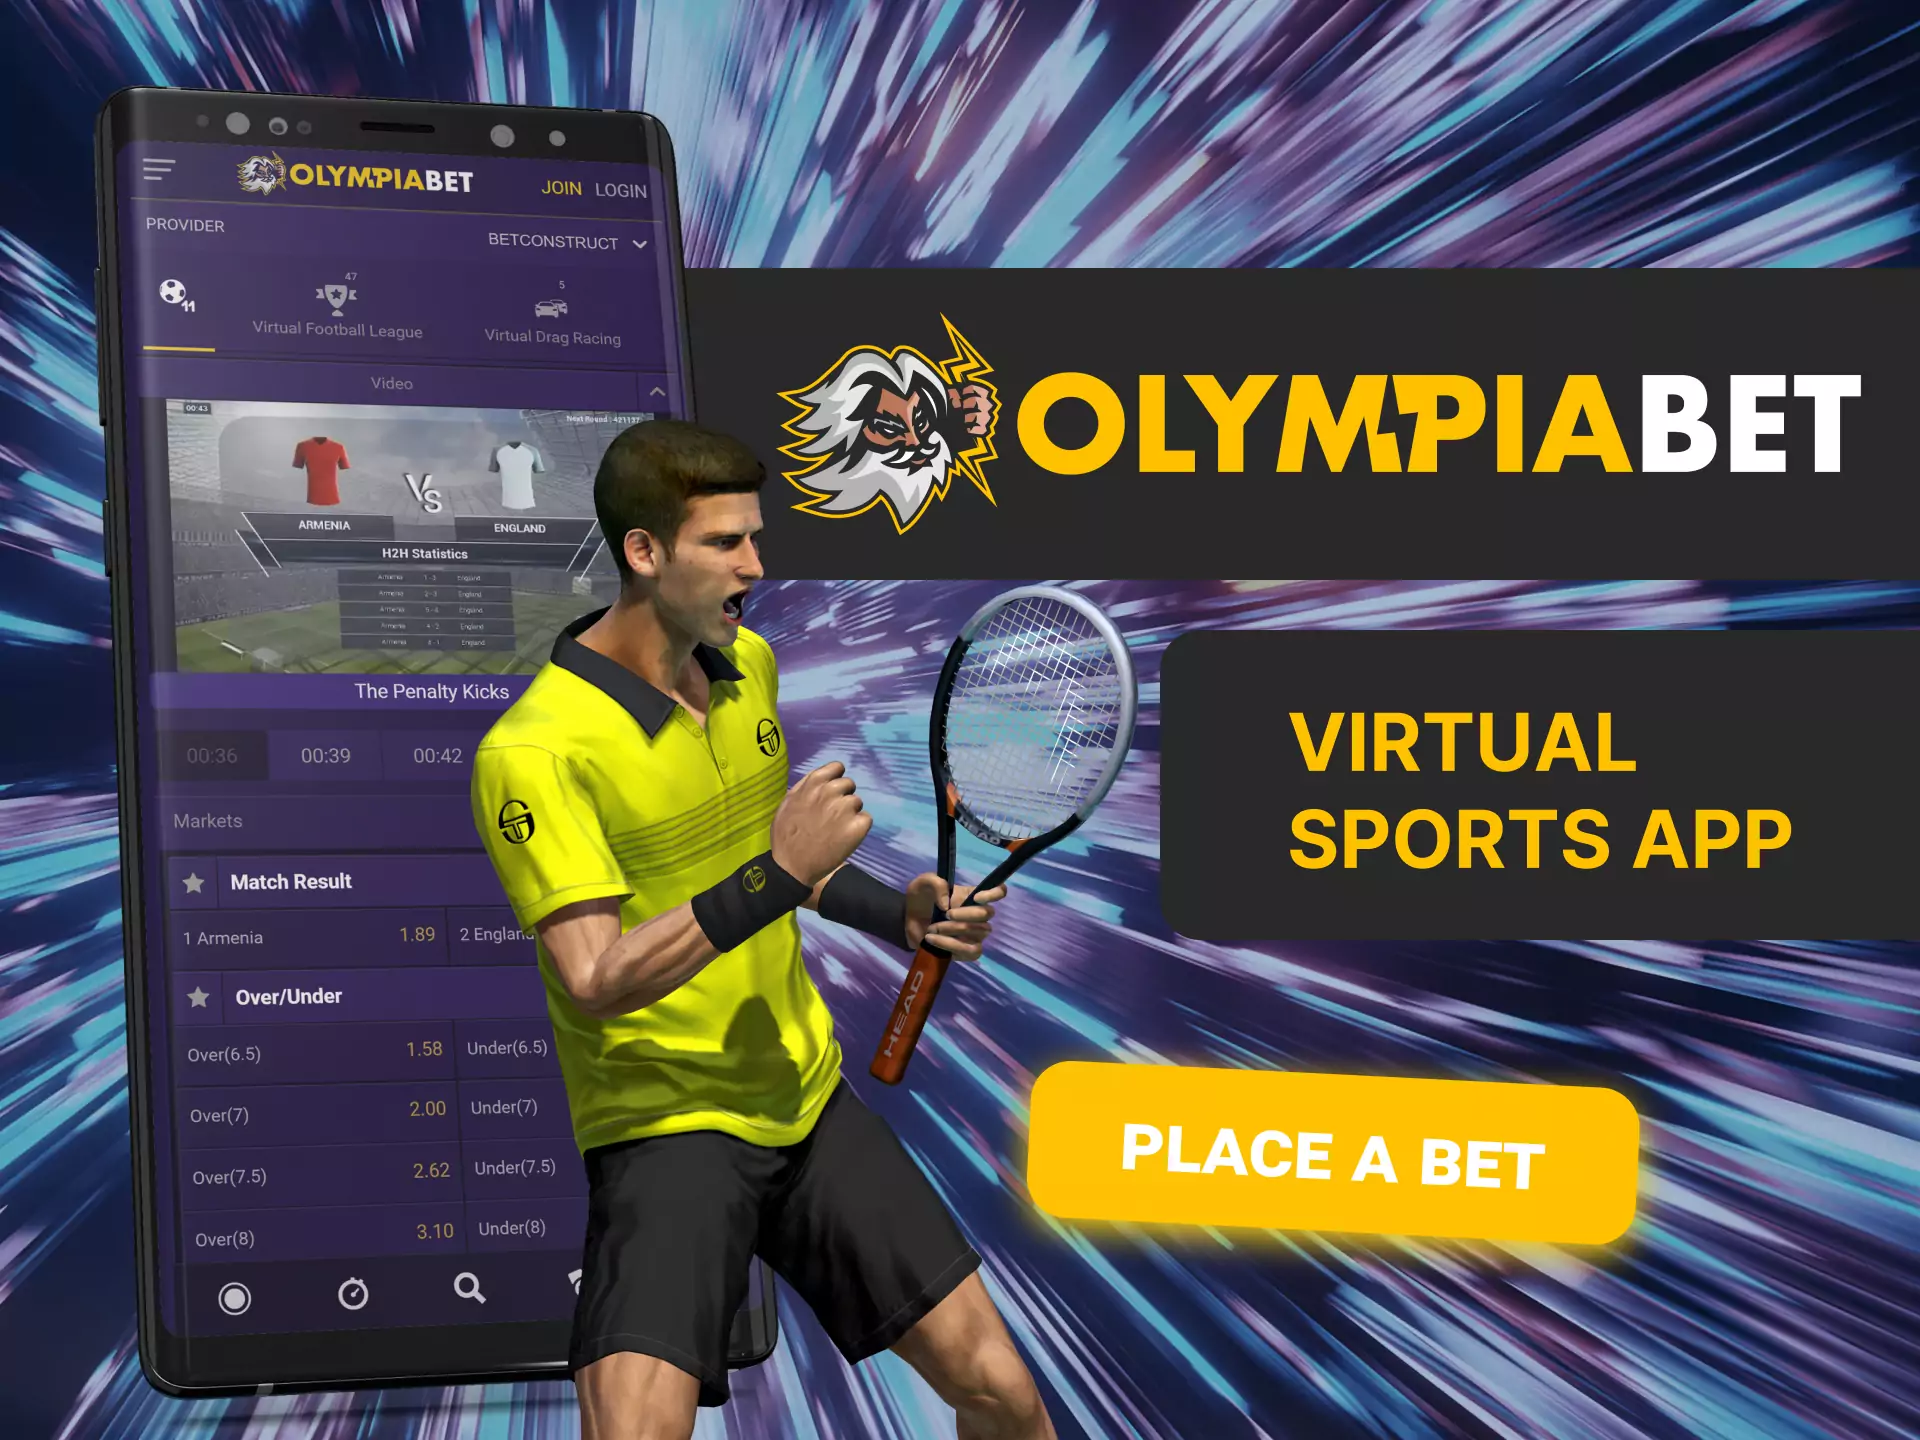 Place bets on virtual sports at OlympiaBet.